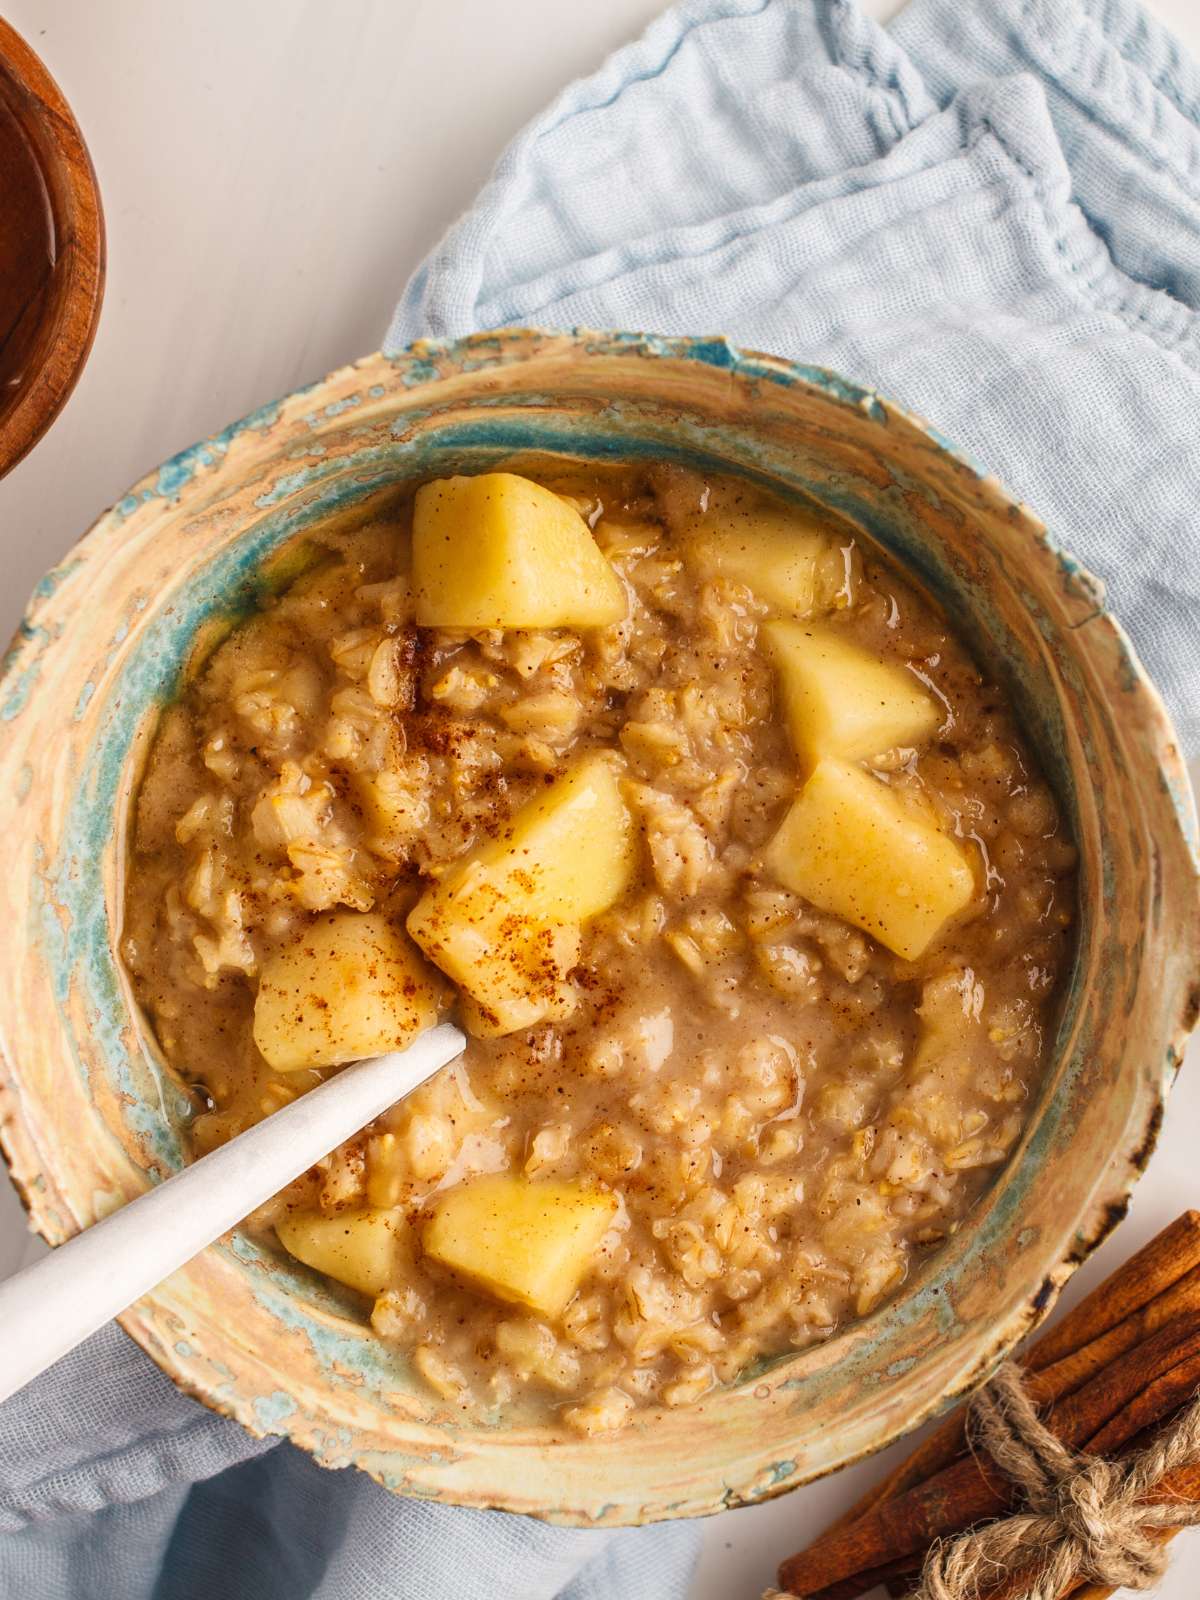 Cinnamon oatmeal in a bowl topped with chopped apple, cinnamon and served with a spoon.